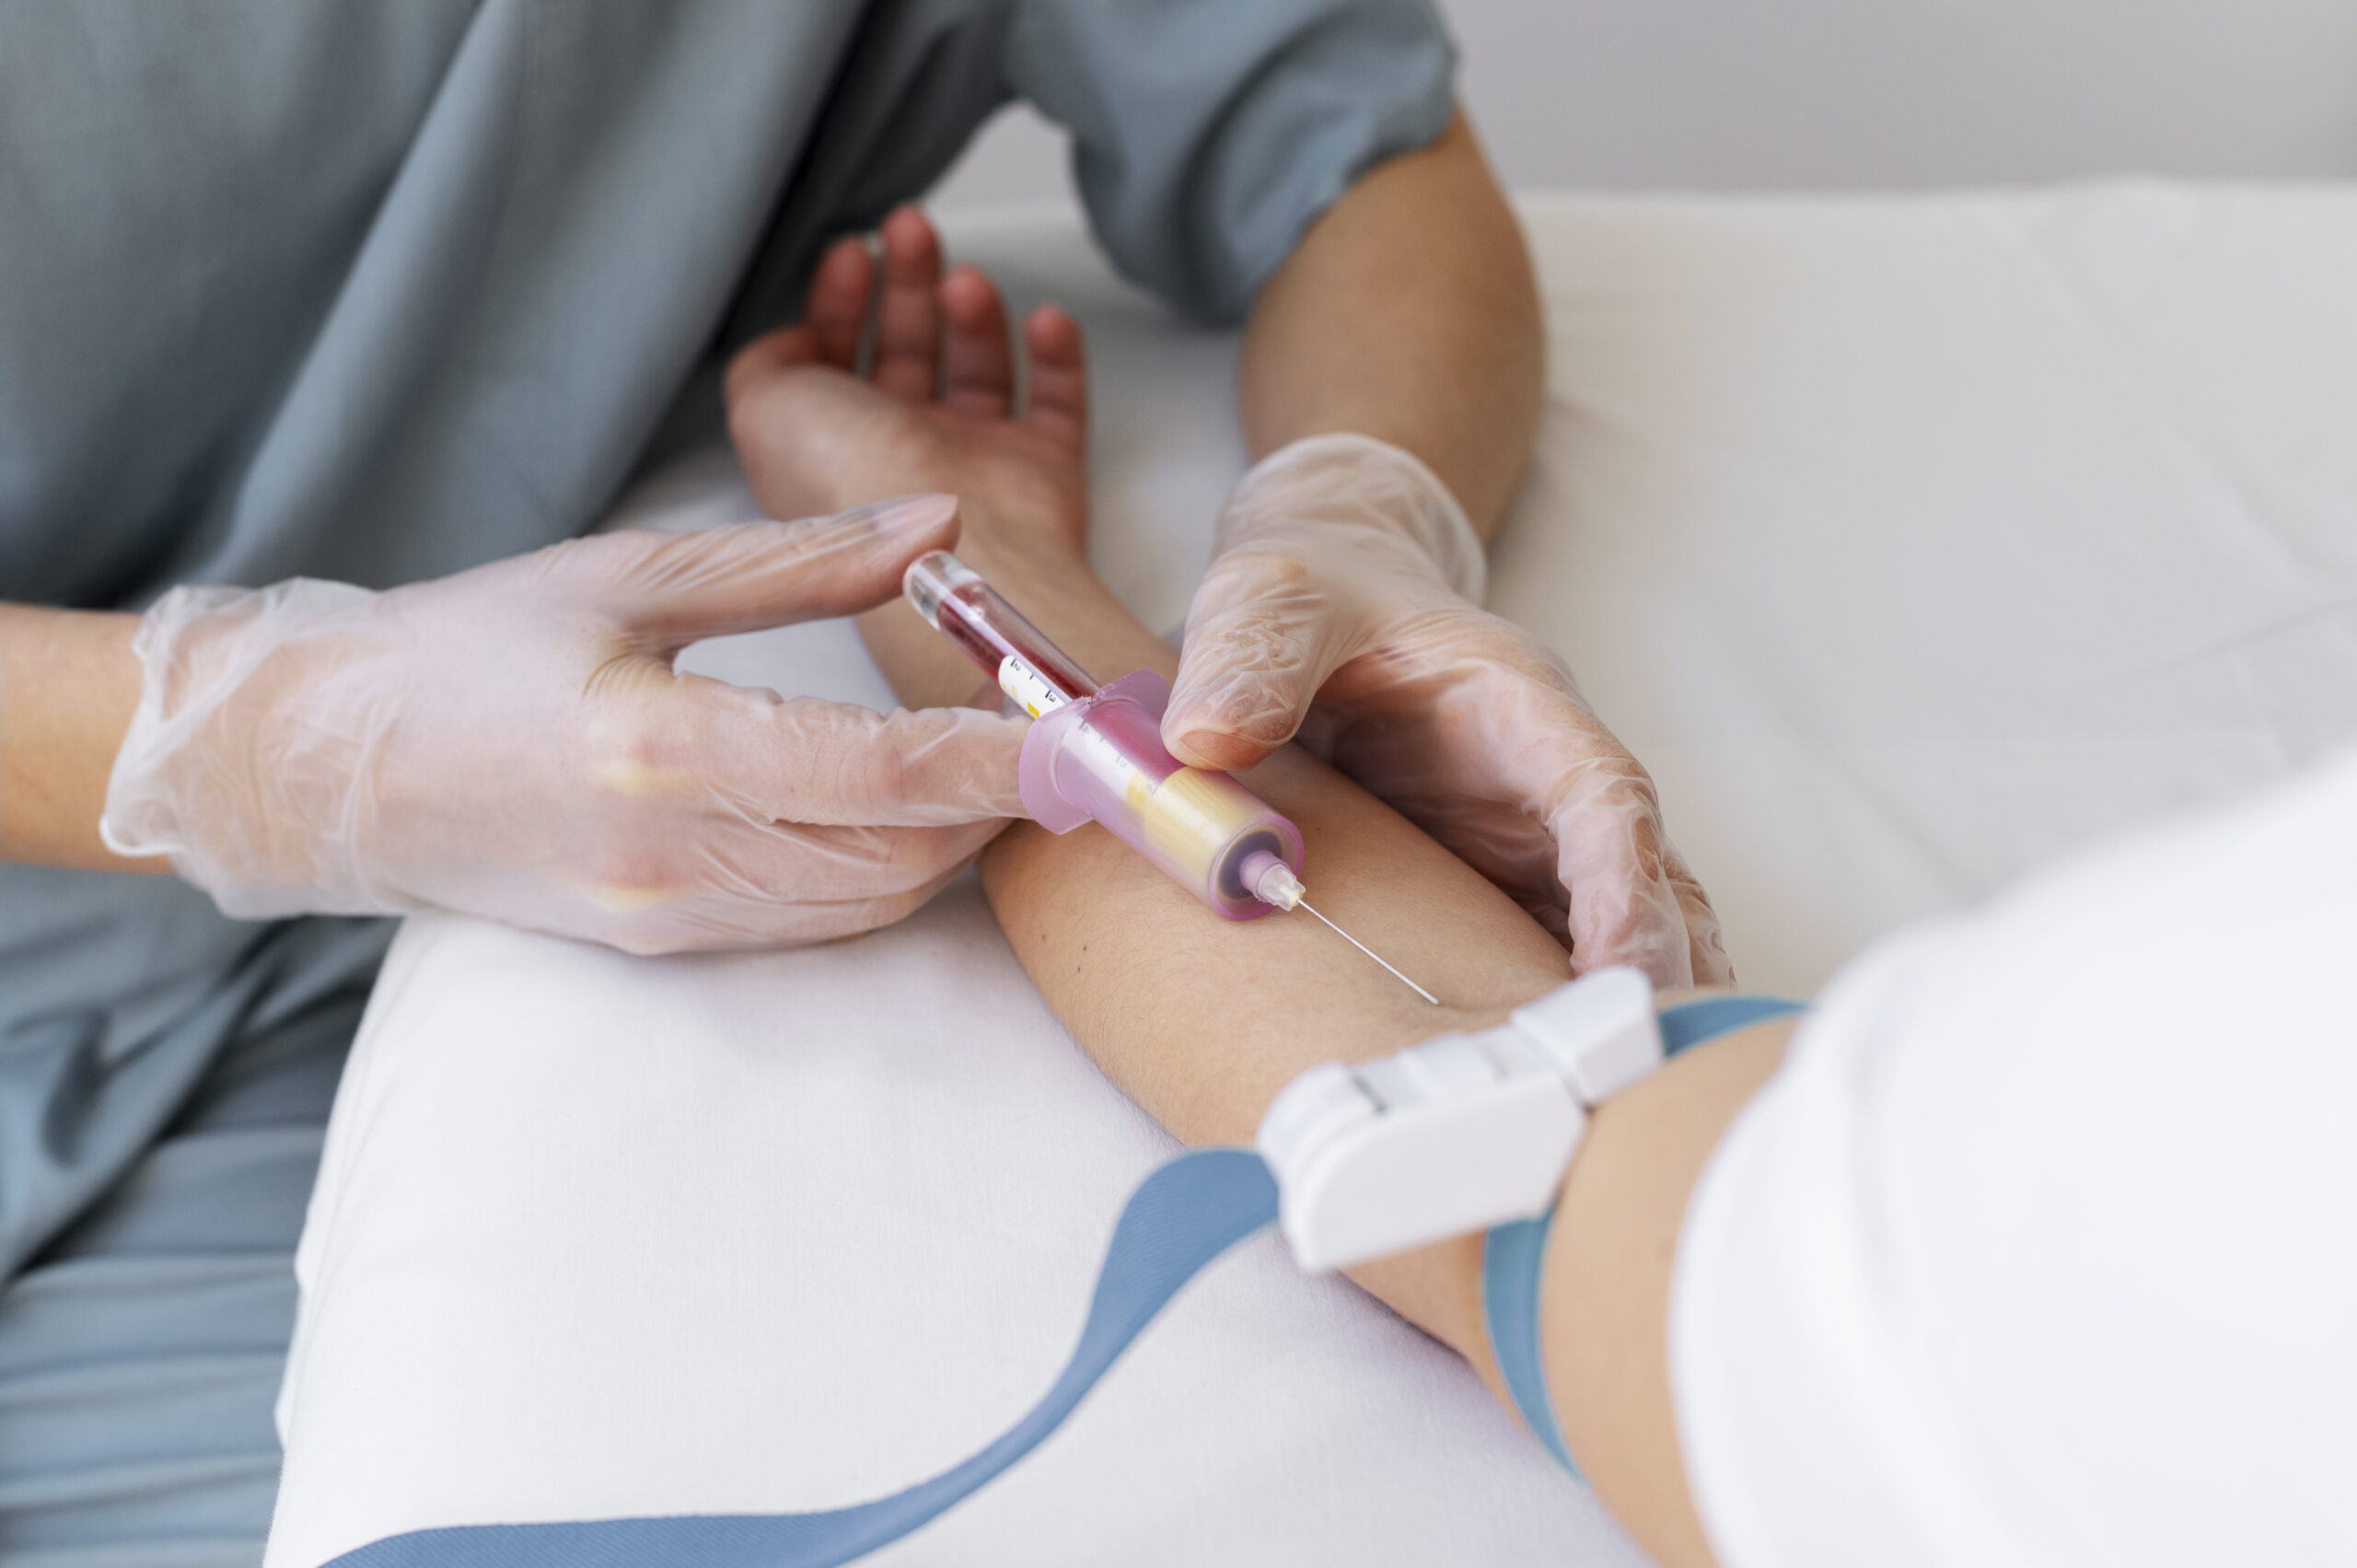 From Bloodletting to Science: A History of Phlebotomy